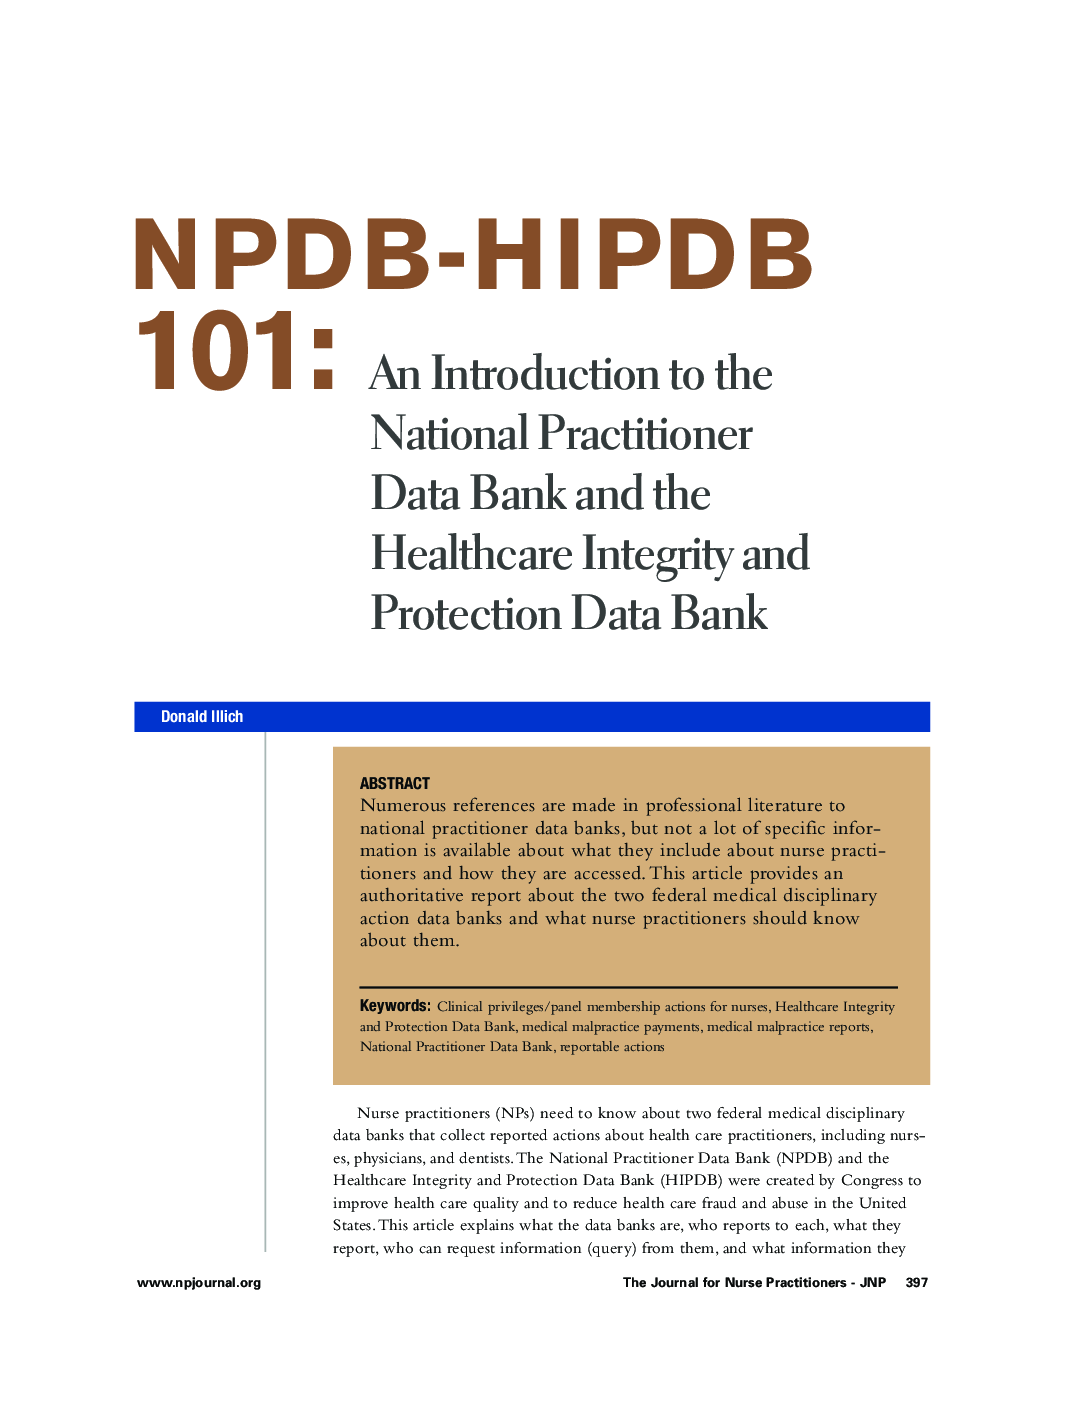 NPDB-HIPDB 101: An Introduction to the National Practitioner Data Bank and the Healthcare Integrity and Protection Data Bank